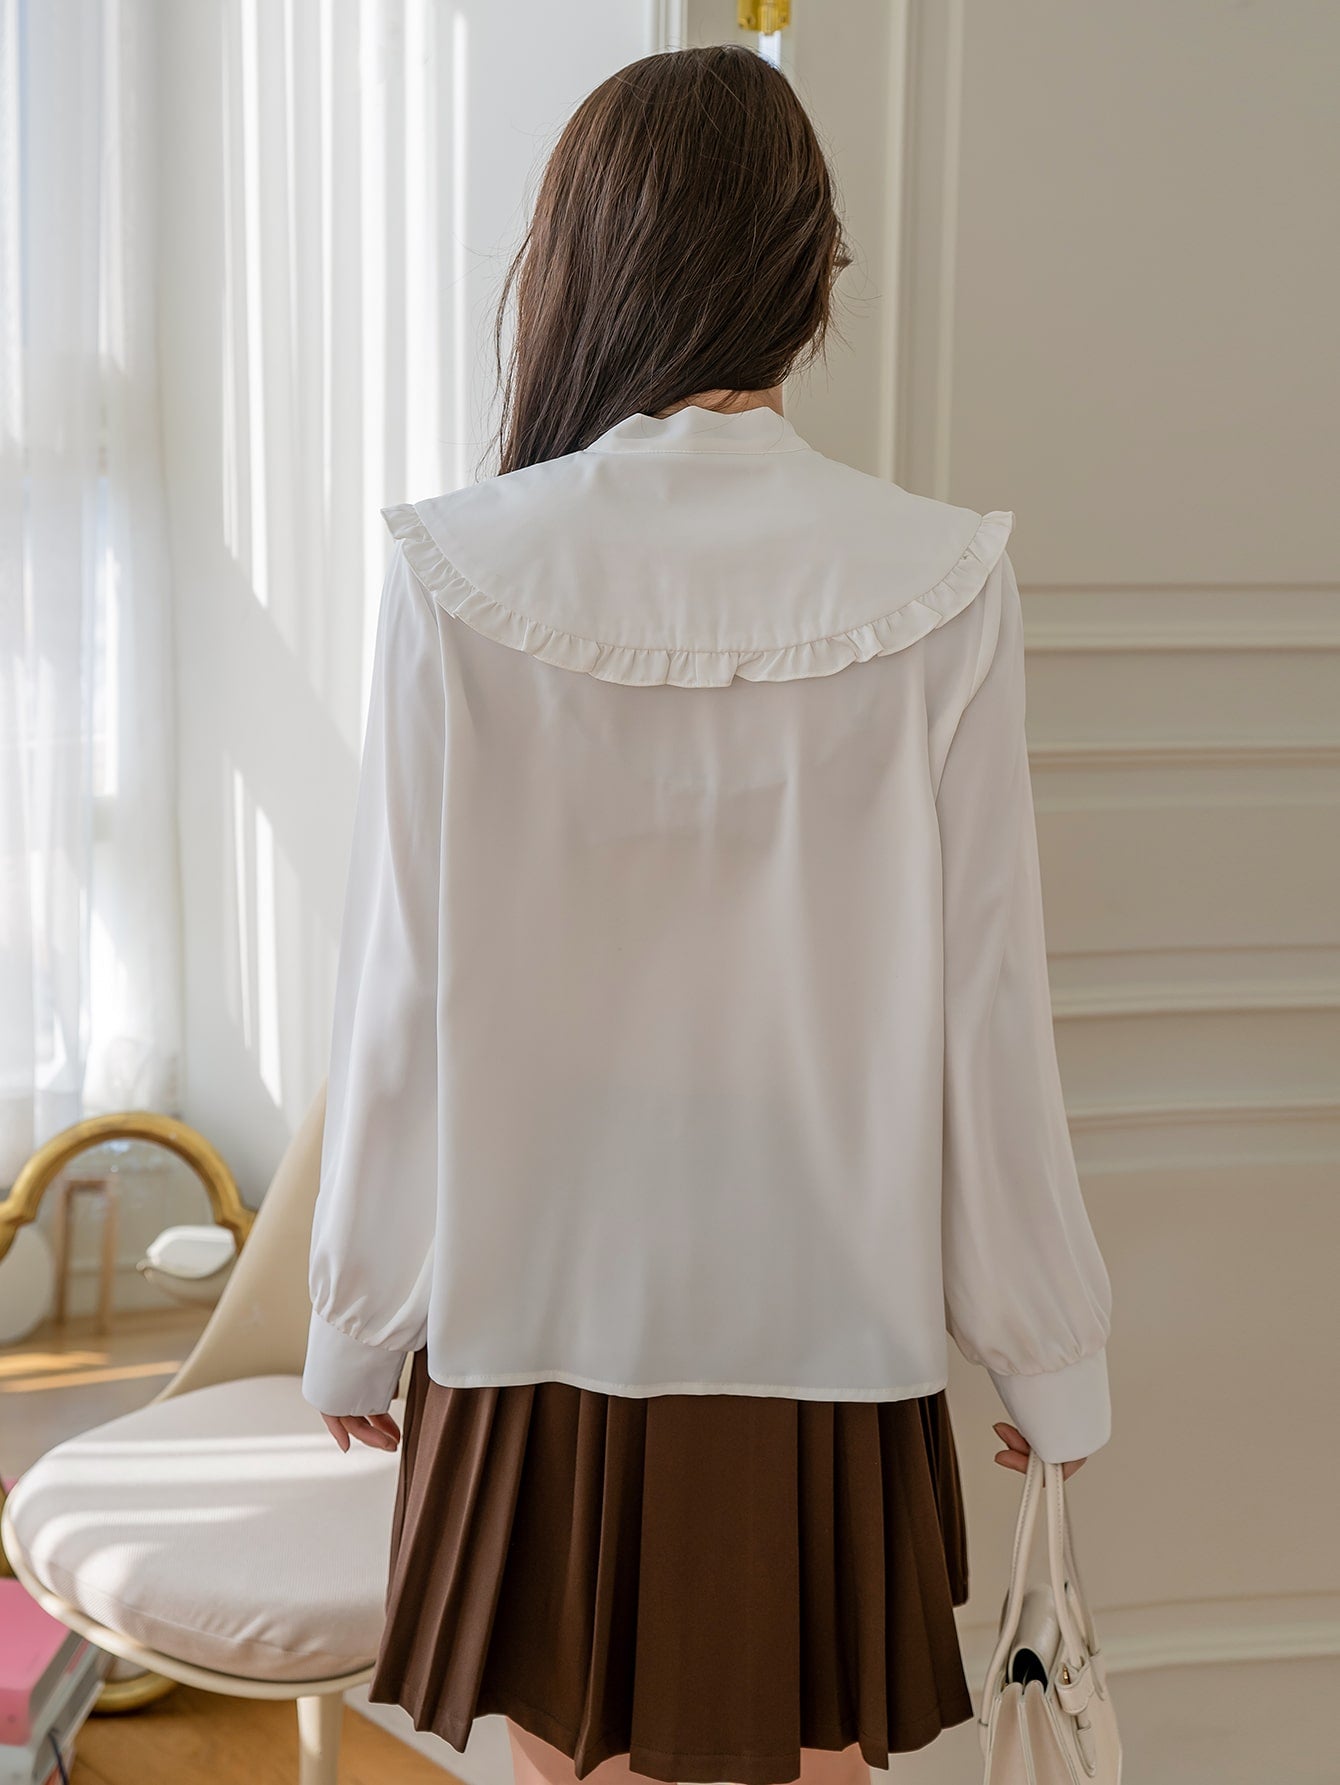 Statement Collar Frill Trim Knot Front Blouse